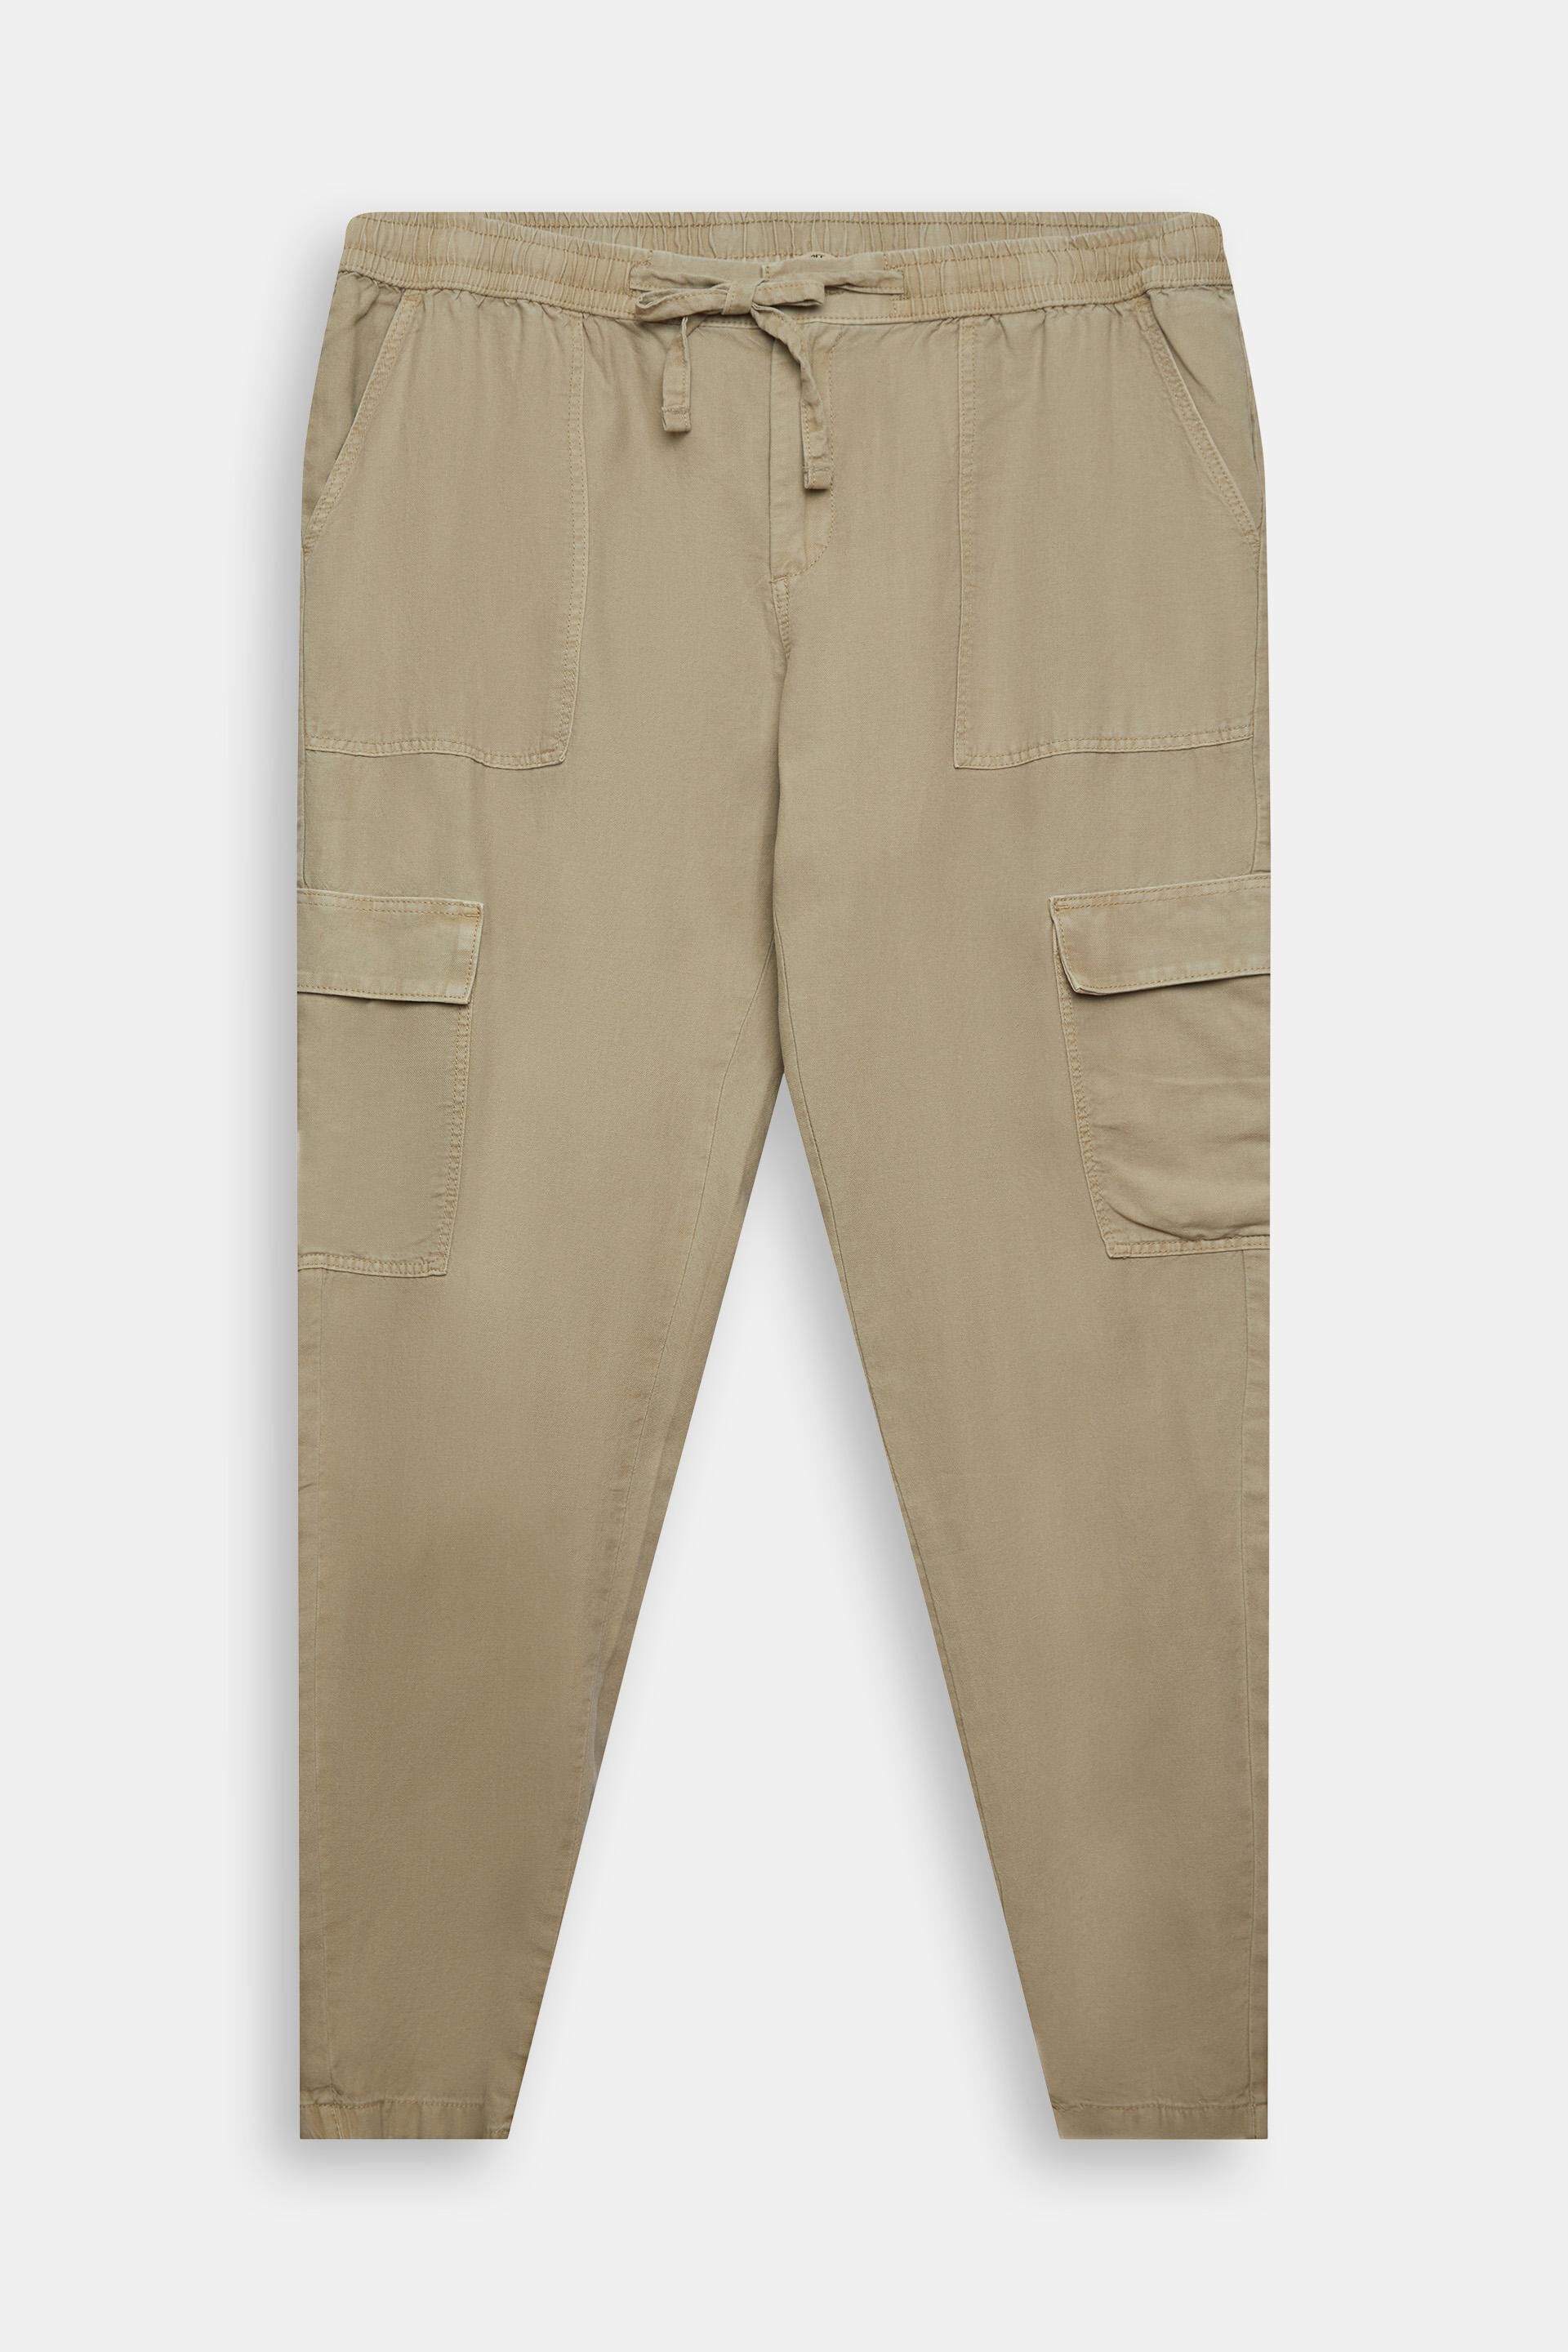 Casual Wear Regular Fit Mens Cargo Pants at Rs 395/piece in Pune | ID:  21081163388